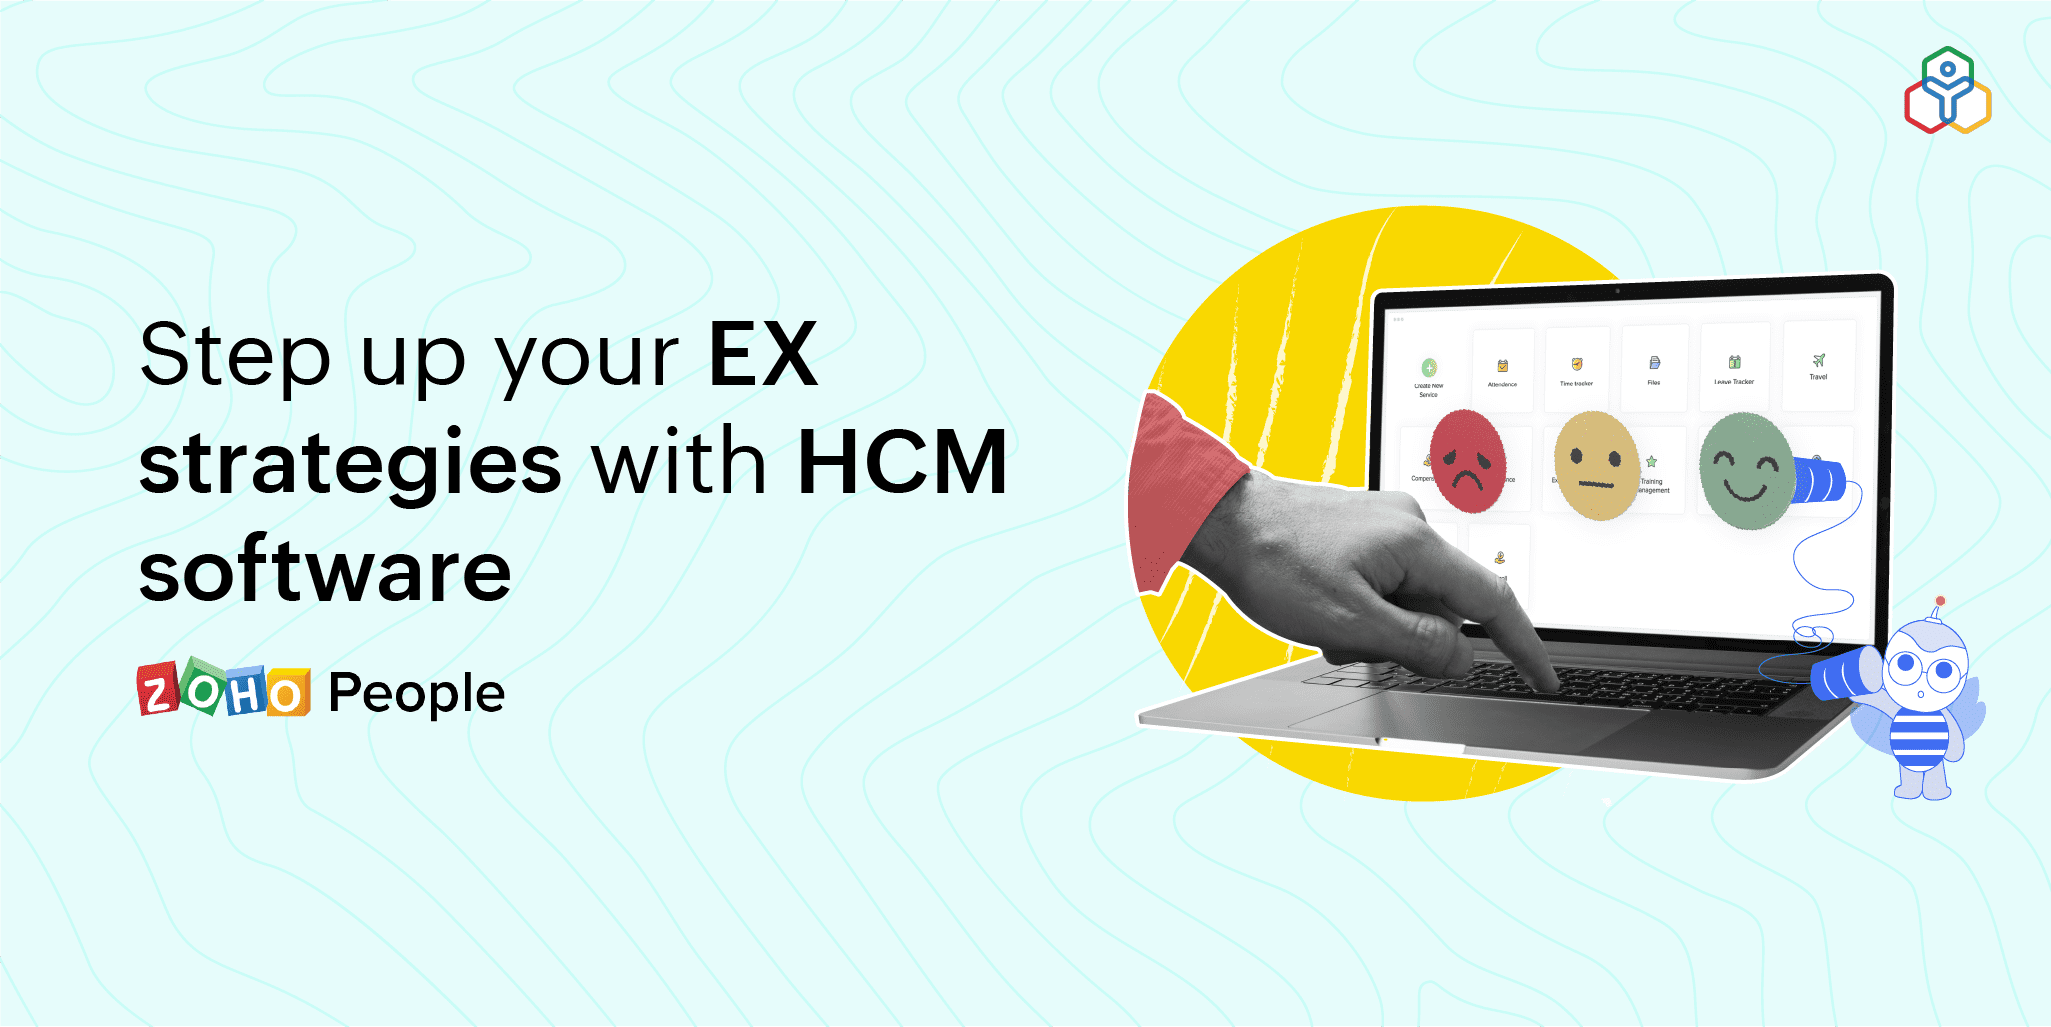 How HCM software improves Employee Experience